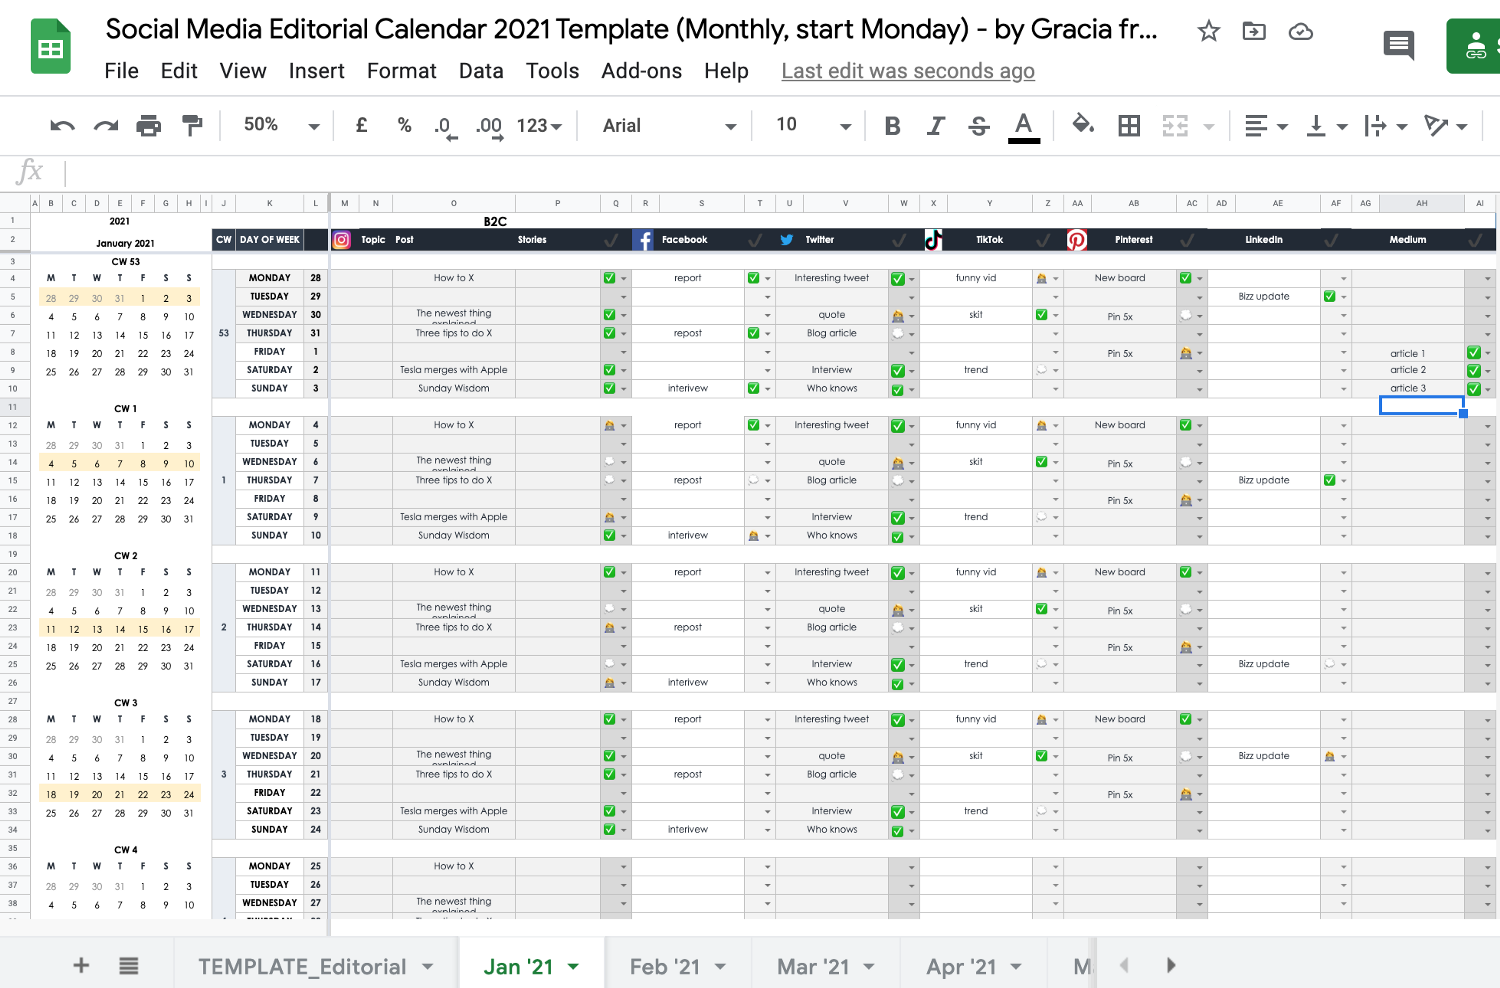 Level up your Content Game with Editorial Calendar CrowdTamers